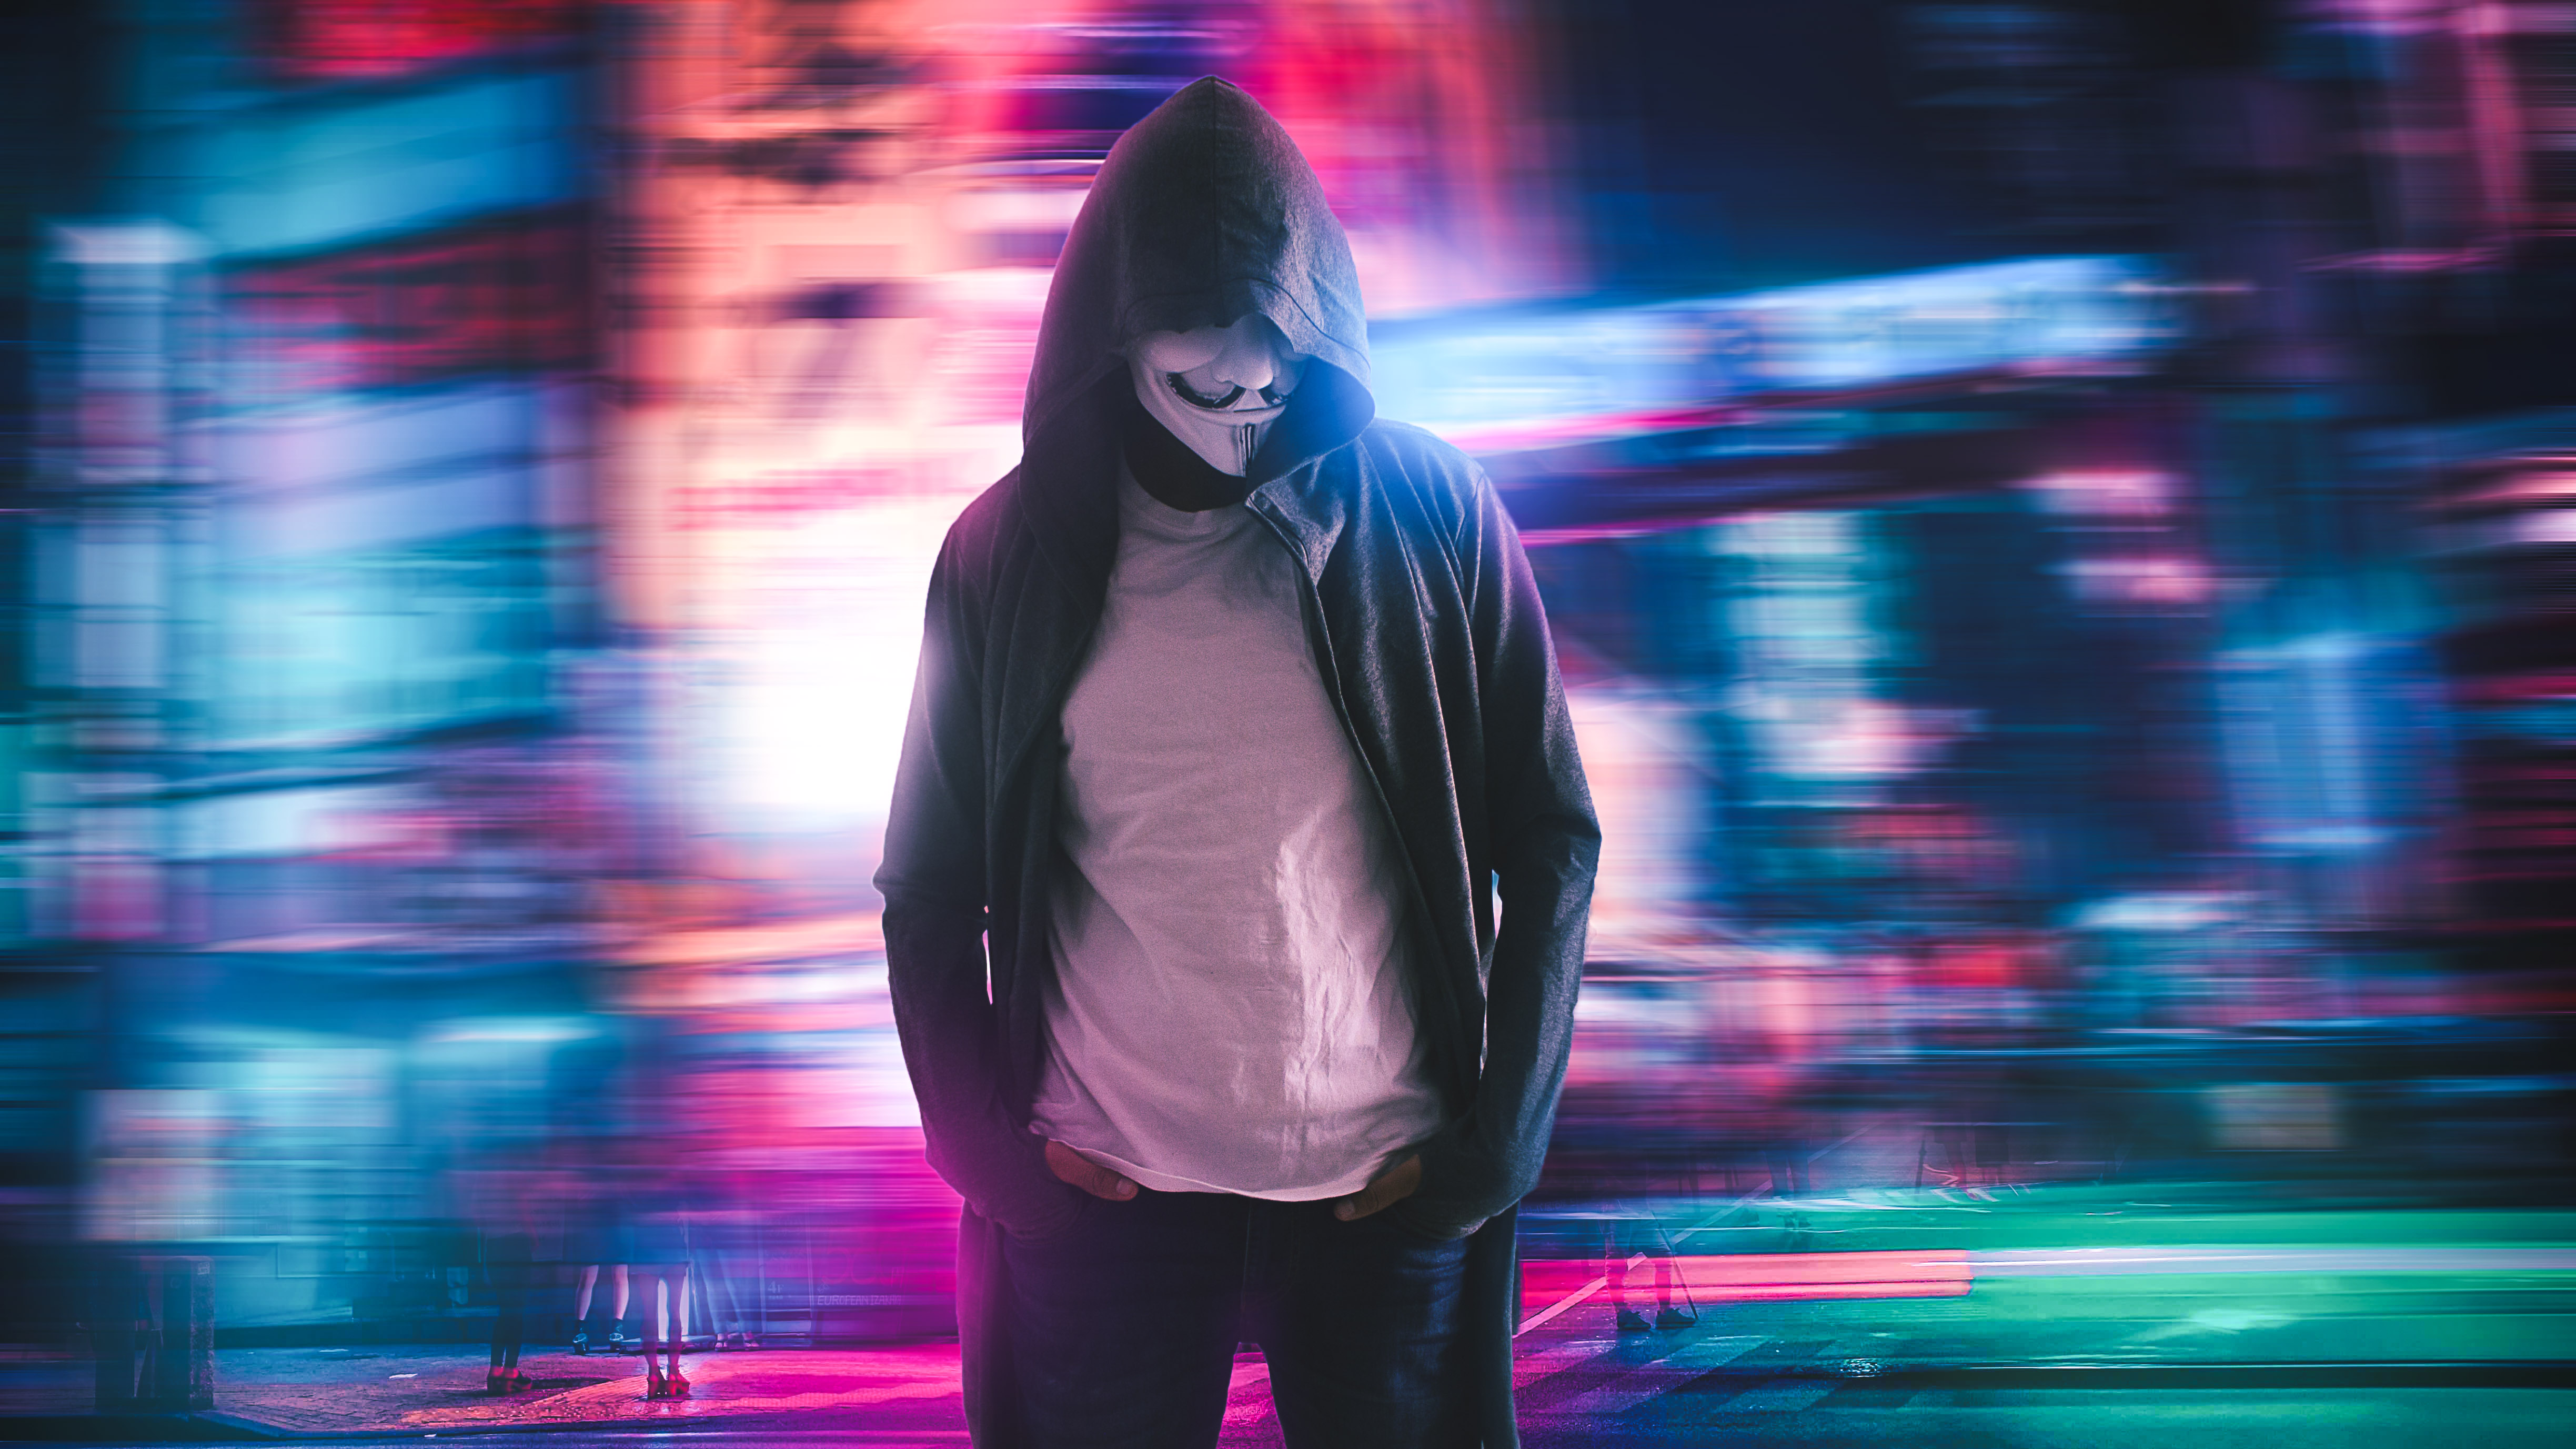 anonymous, miscellanea, miscellaneous, blur, smooth, long exposure, neon, mask, hood